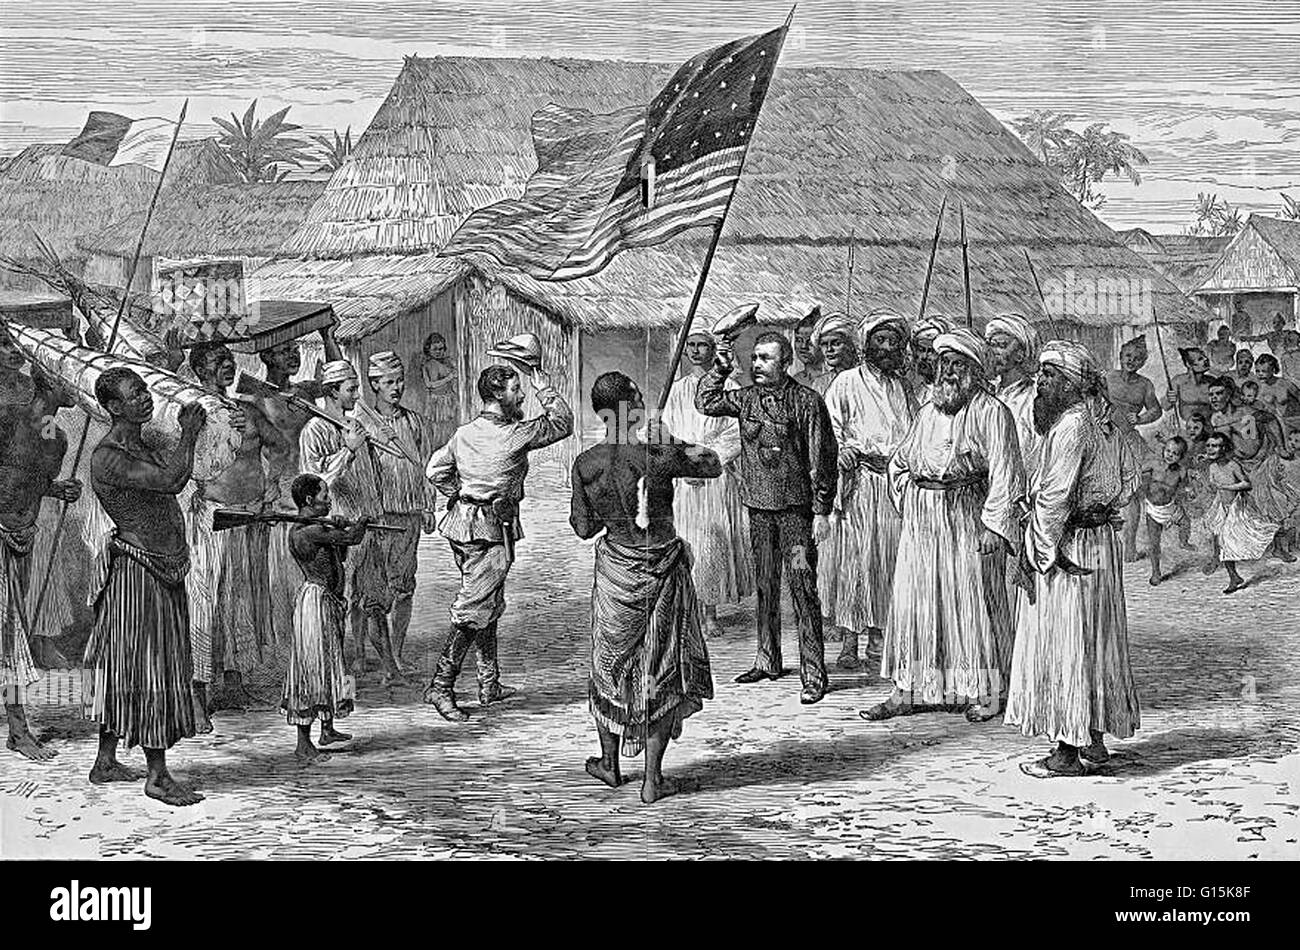 Engraving entitled: Stanley meets Livingstone. Showing Henry Morton Stanley greeting Dr. David Livingstone at a village in Ujiji, near Lake Tanganyika in present day Tanzania. Stanley's porters stand on the left, one at center carries an American flag; Li Stock Photo